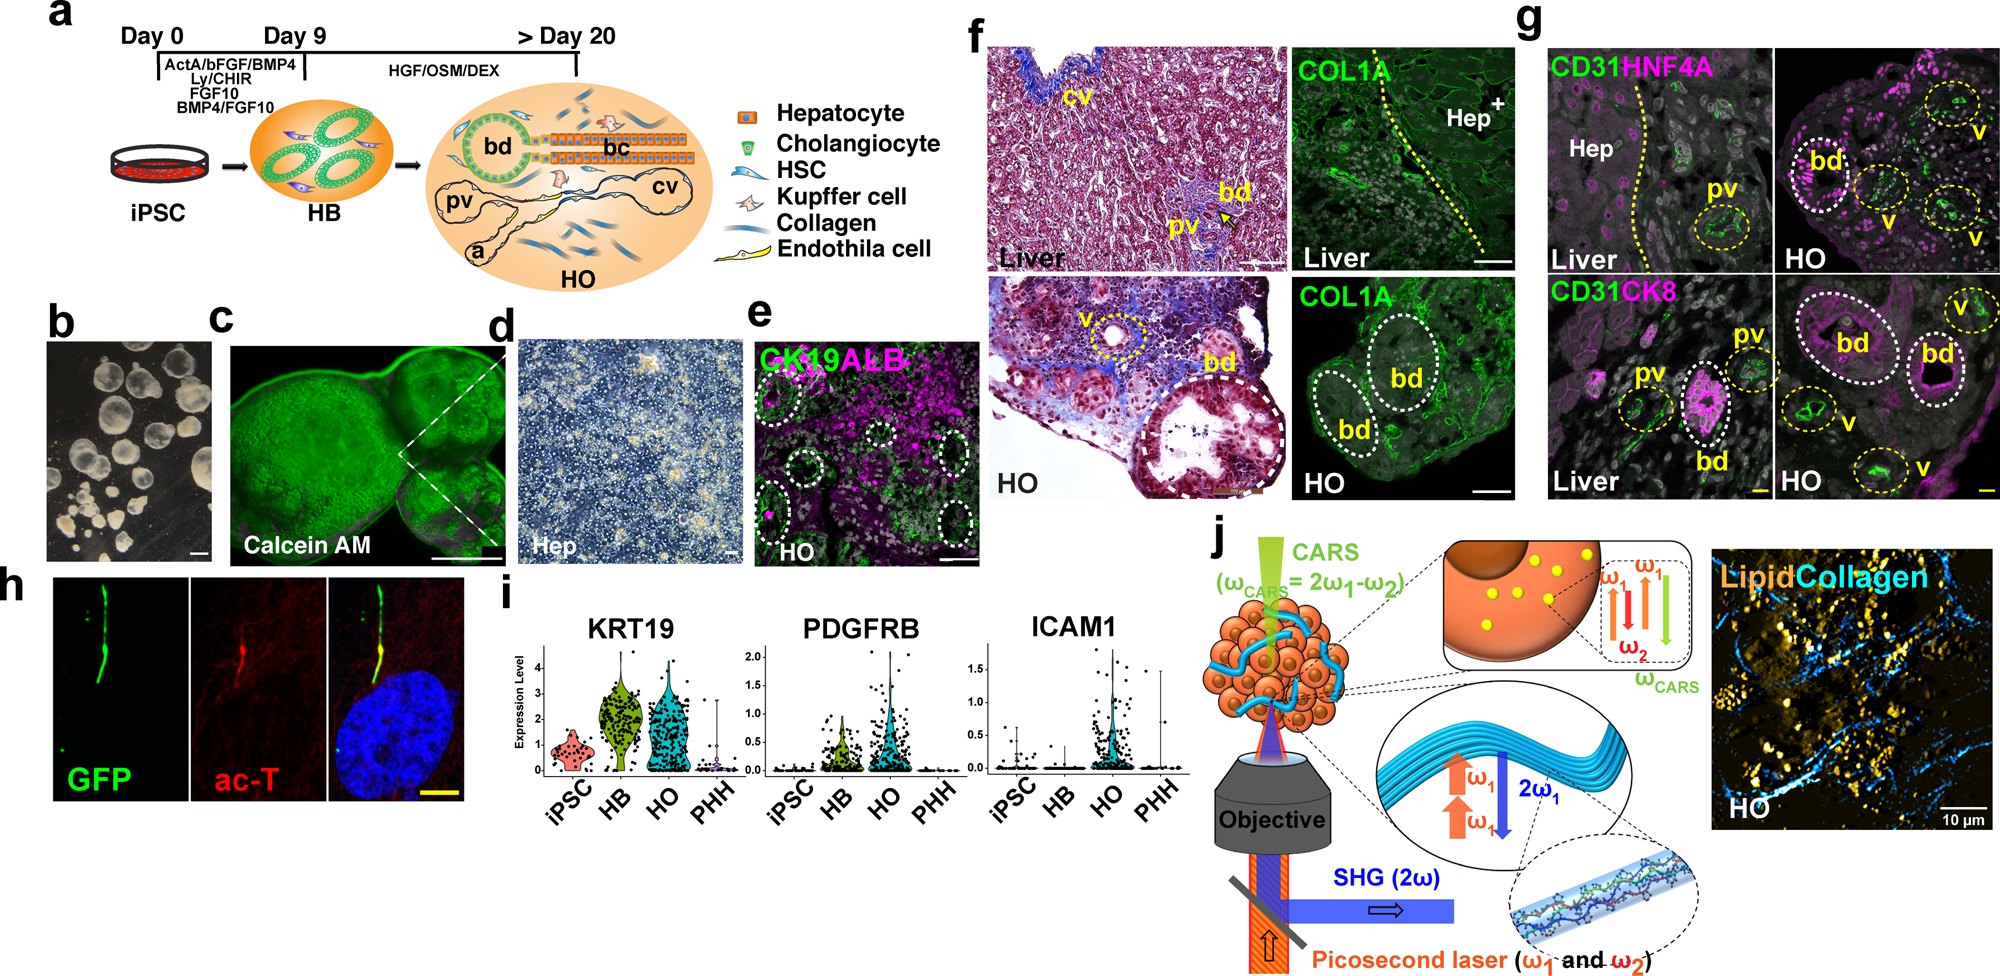 A human multi-lineage hepatic organoid model for liver fibrosis